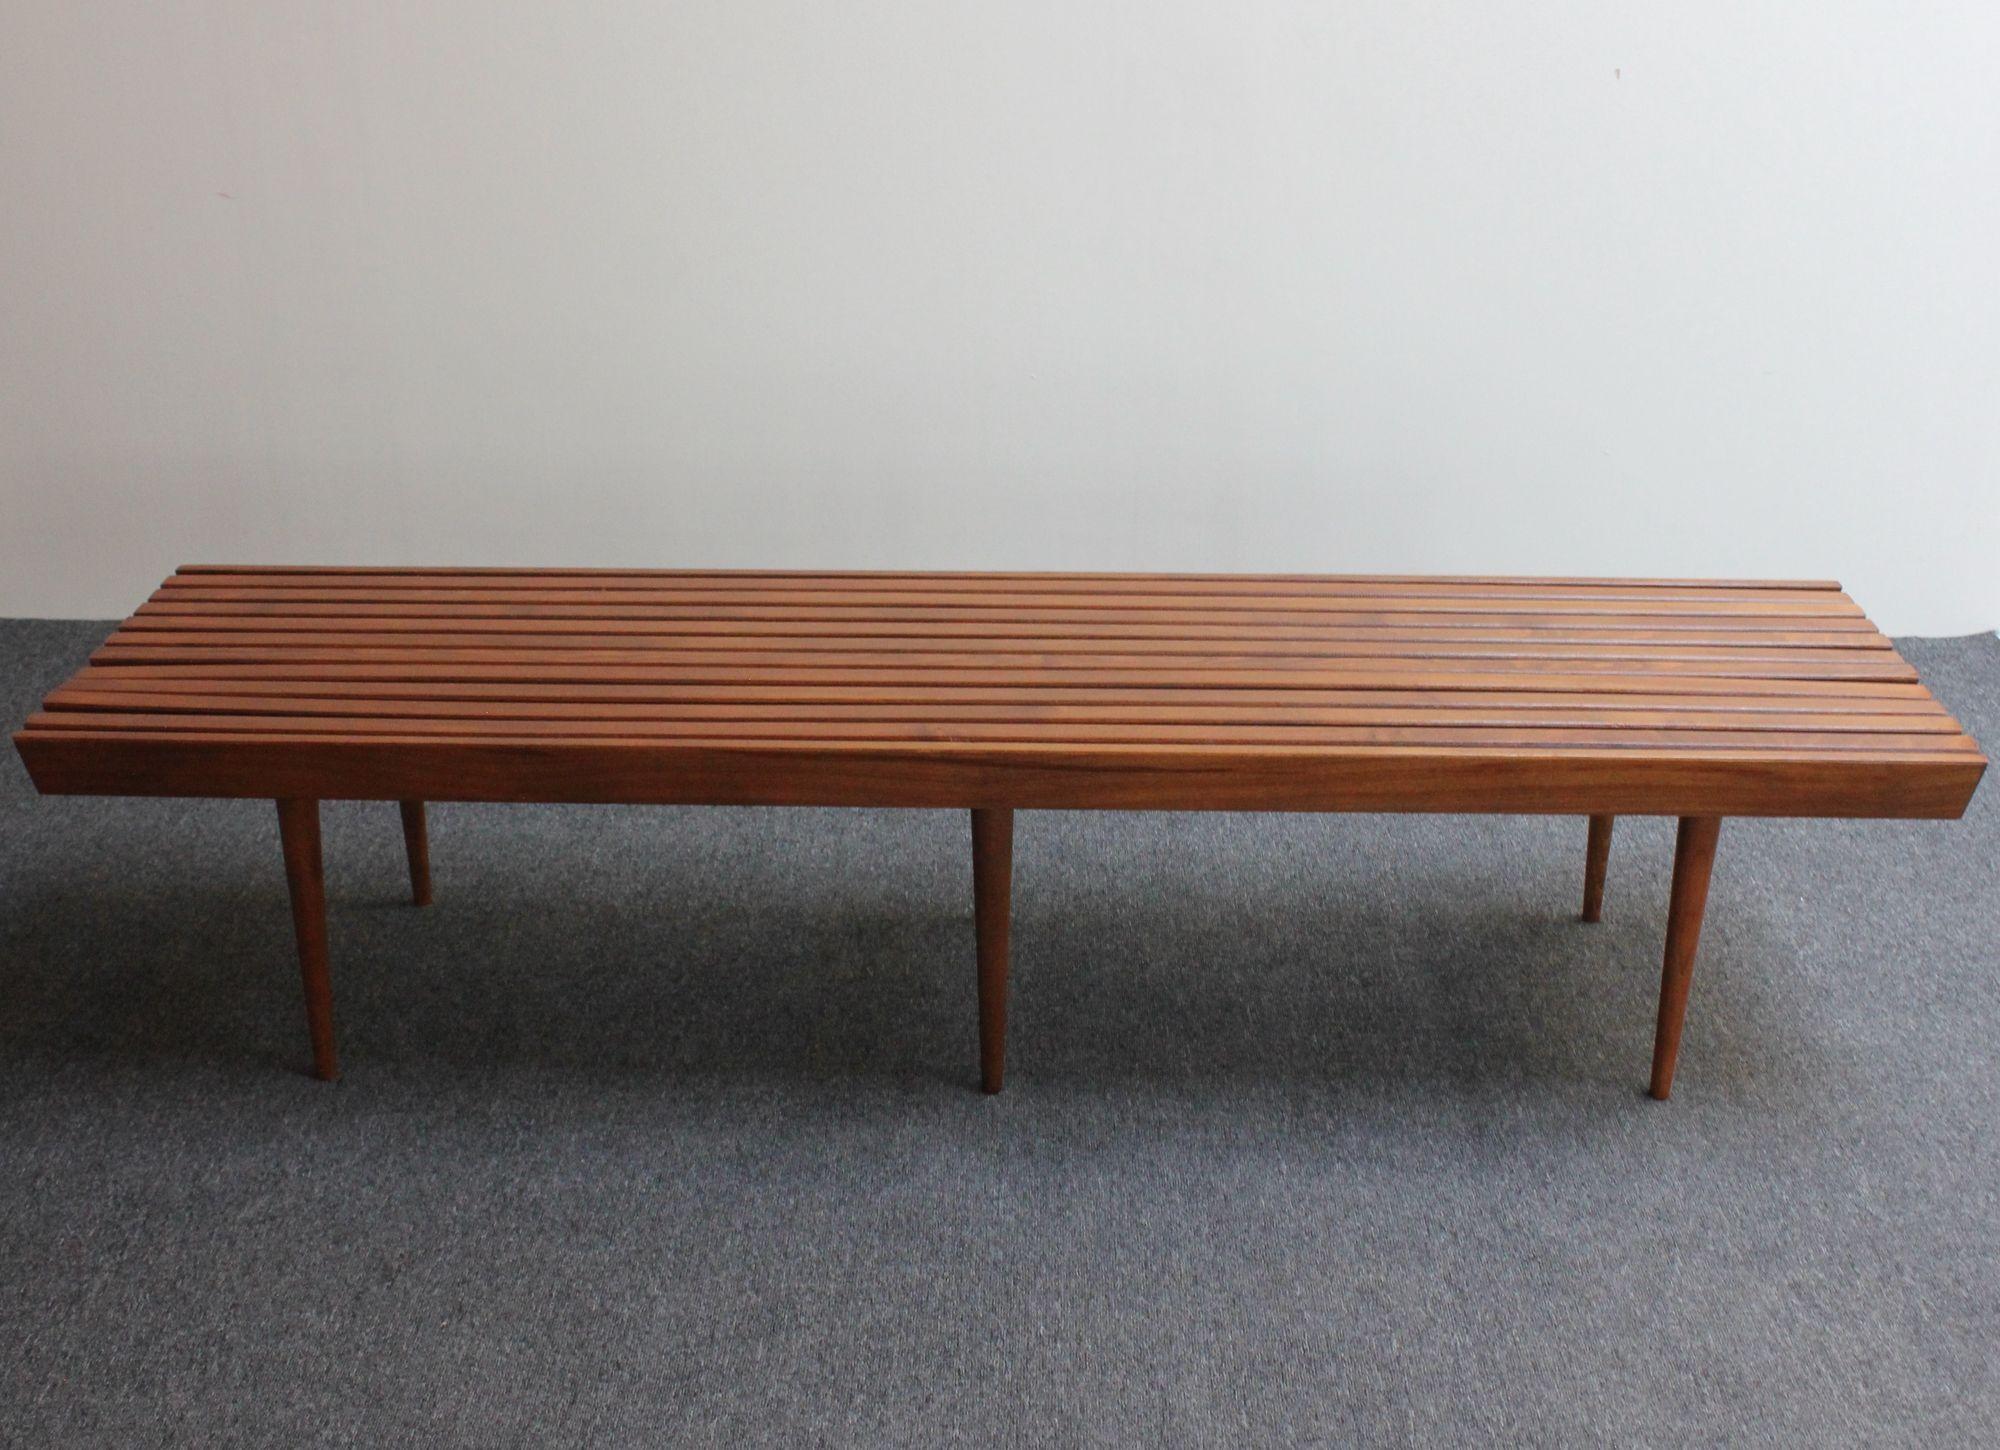 Long Mid-Century Modern Walnut Slatted Bench / Coffee Table with Tapered Legs For Sale 12